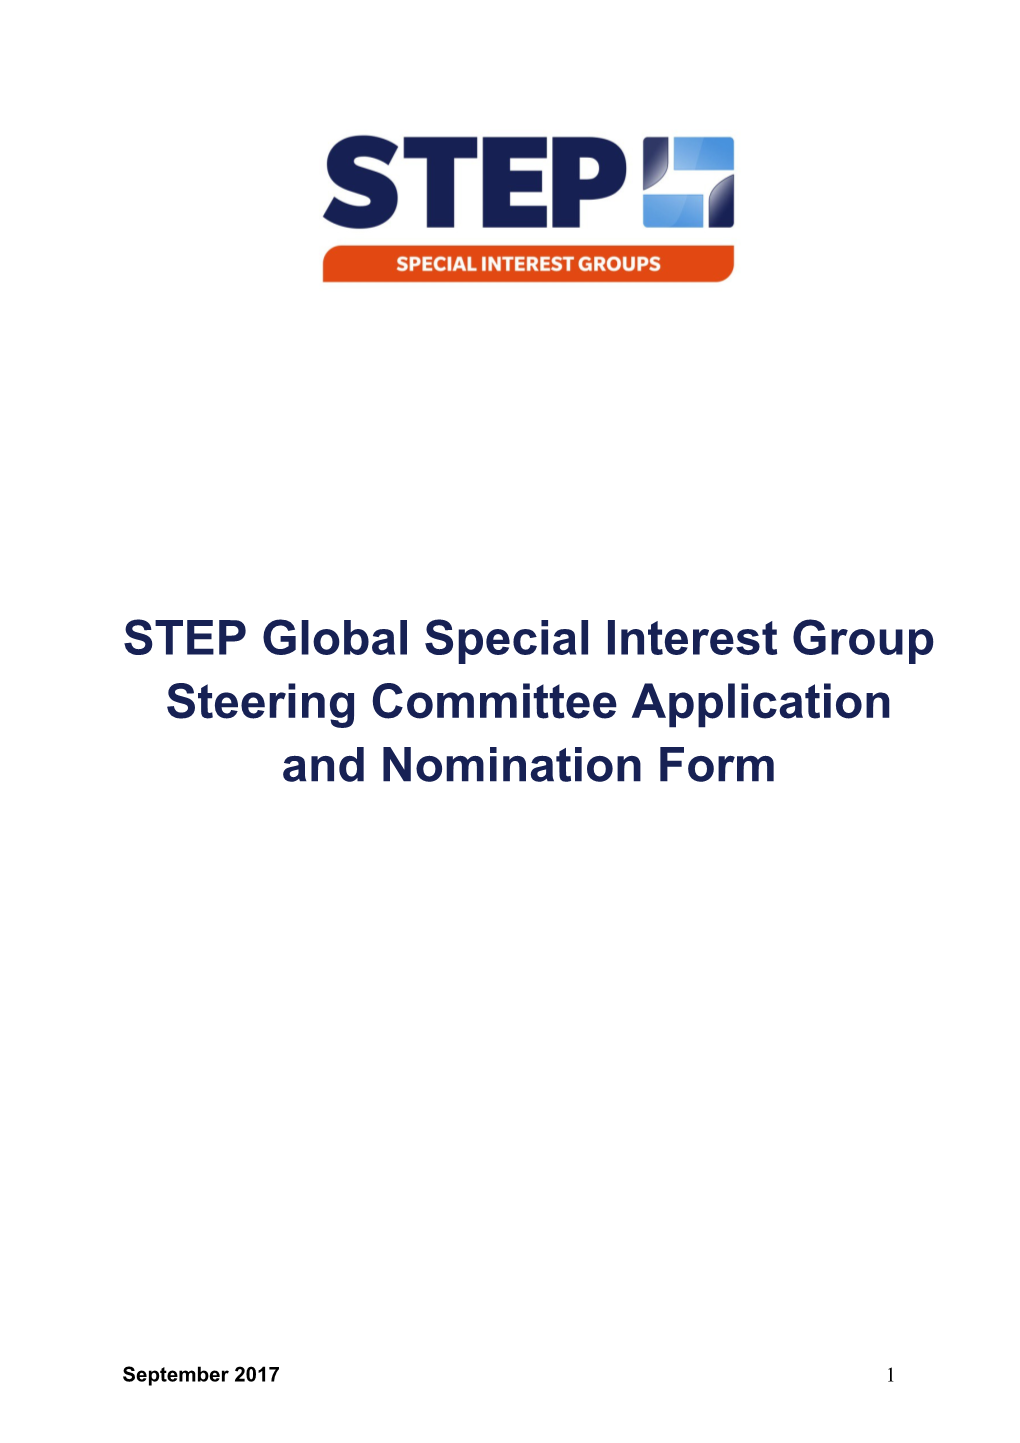 STEP Global Special Interest Group Steering Committee Application and Nomination Form